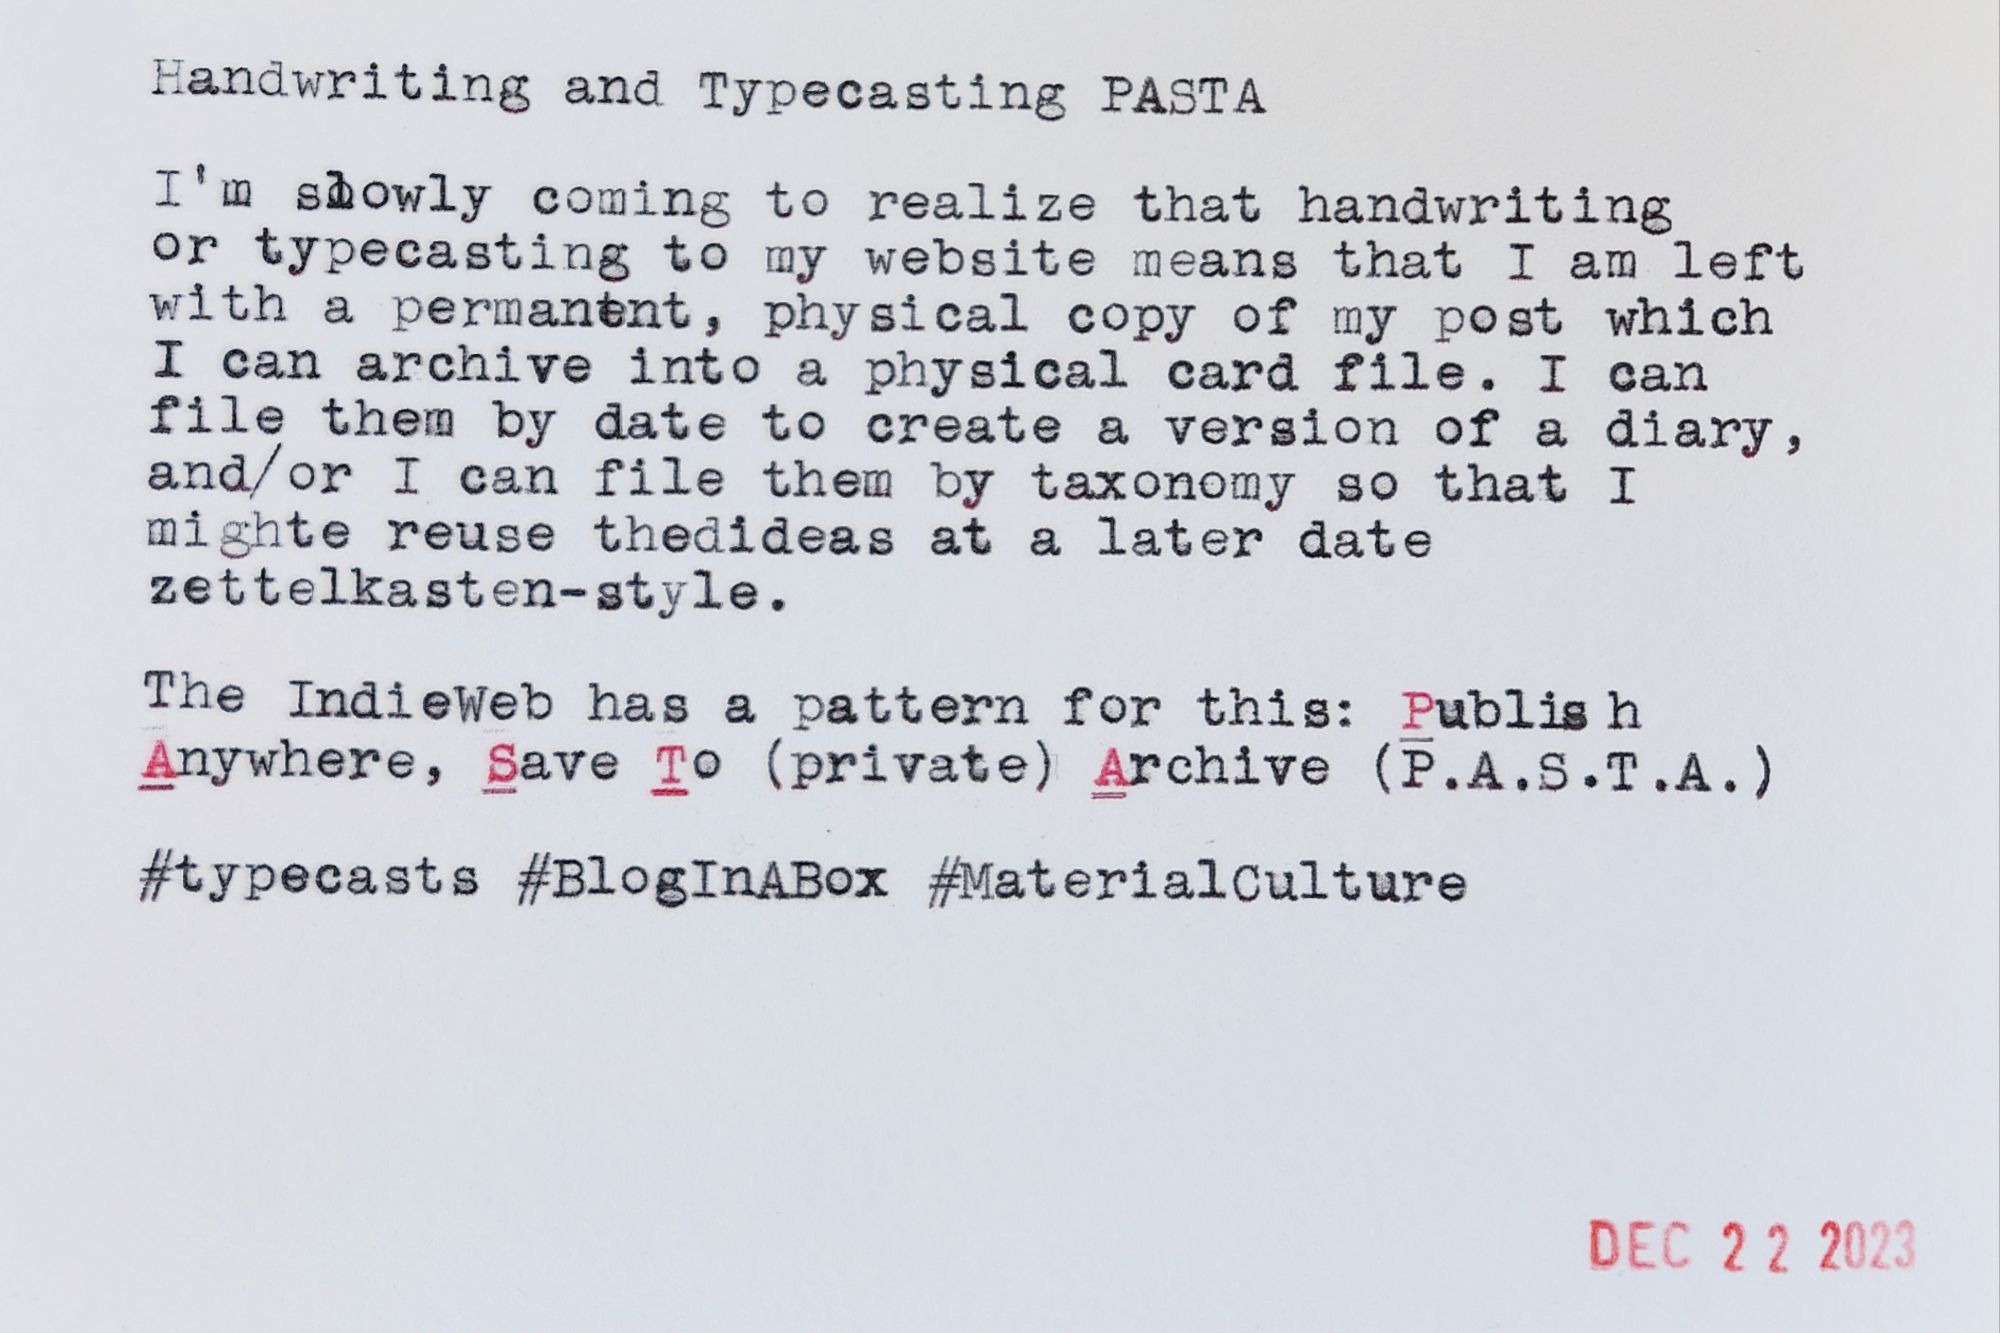 Typewritten index card that reads: Handwriting and Typecasting PASTA 
I'm slowly coming to realize that handwriting or typecasting to my website means that I am left with a permanent, physical copy of my post which I can archive into a physical card file. I can file them by date to create a version of a diary, and/or I can file them by taxonomy so that I might reuse the ideas at a later date zettelkasten-style. 
The IndieWeb has a pattern for this: Publish Anywhere, Save To (private) Archive (P.A.S.T.A.) 
#typecasts #BlogInABox #MaterialCulture 
DEC 22 2023